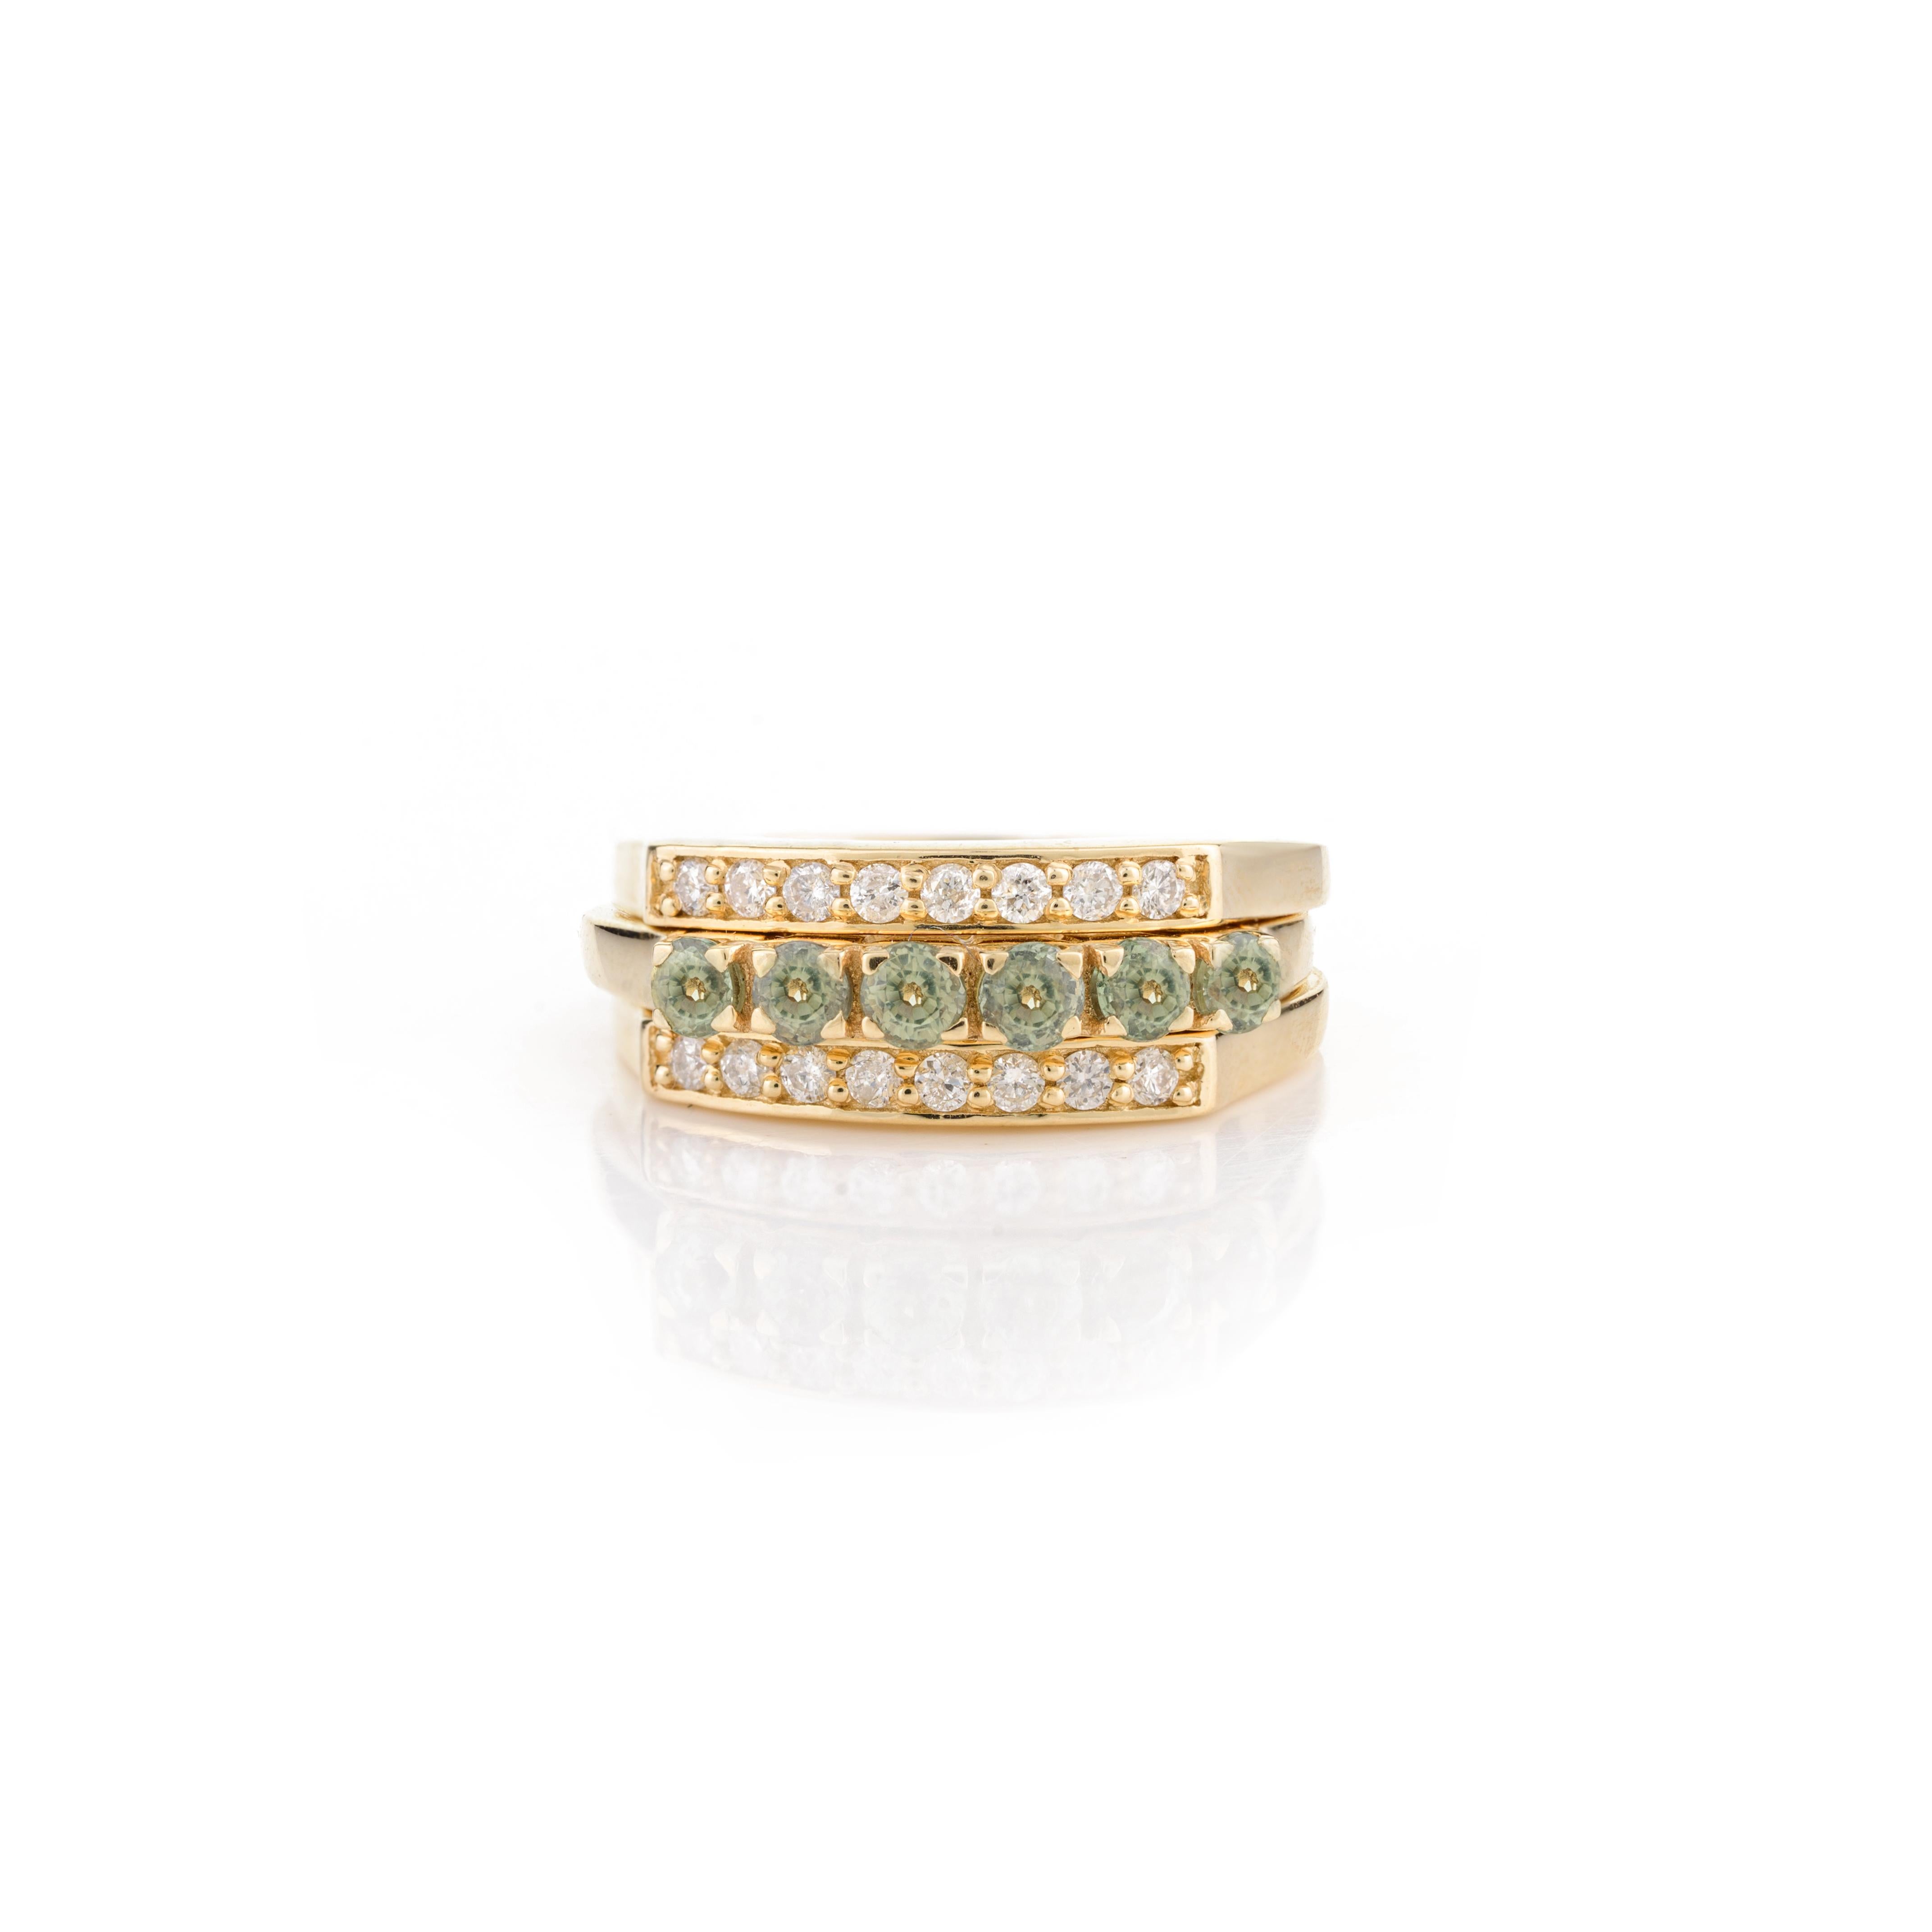 For Sale:  Unique Two-in-One Green Sapphire and Diamond Wedding Ring 14k Solid Yellow Gold 3